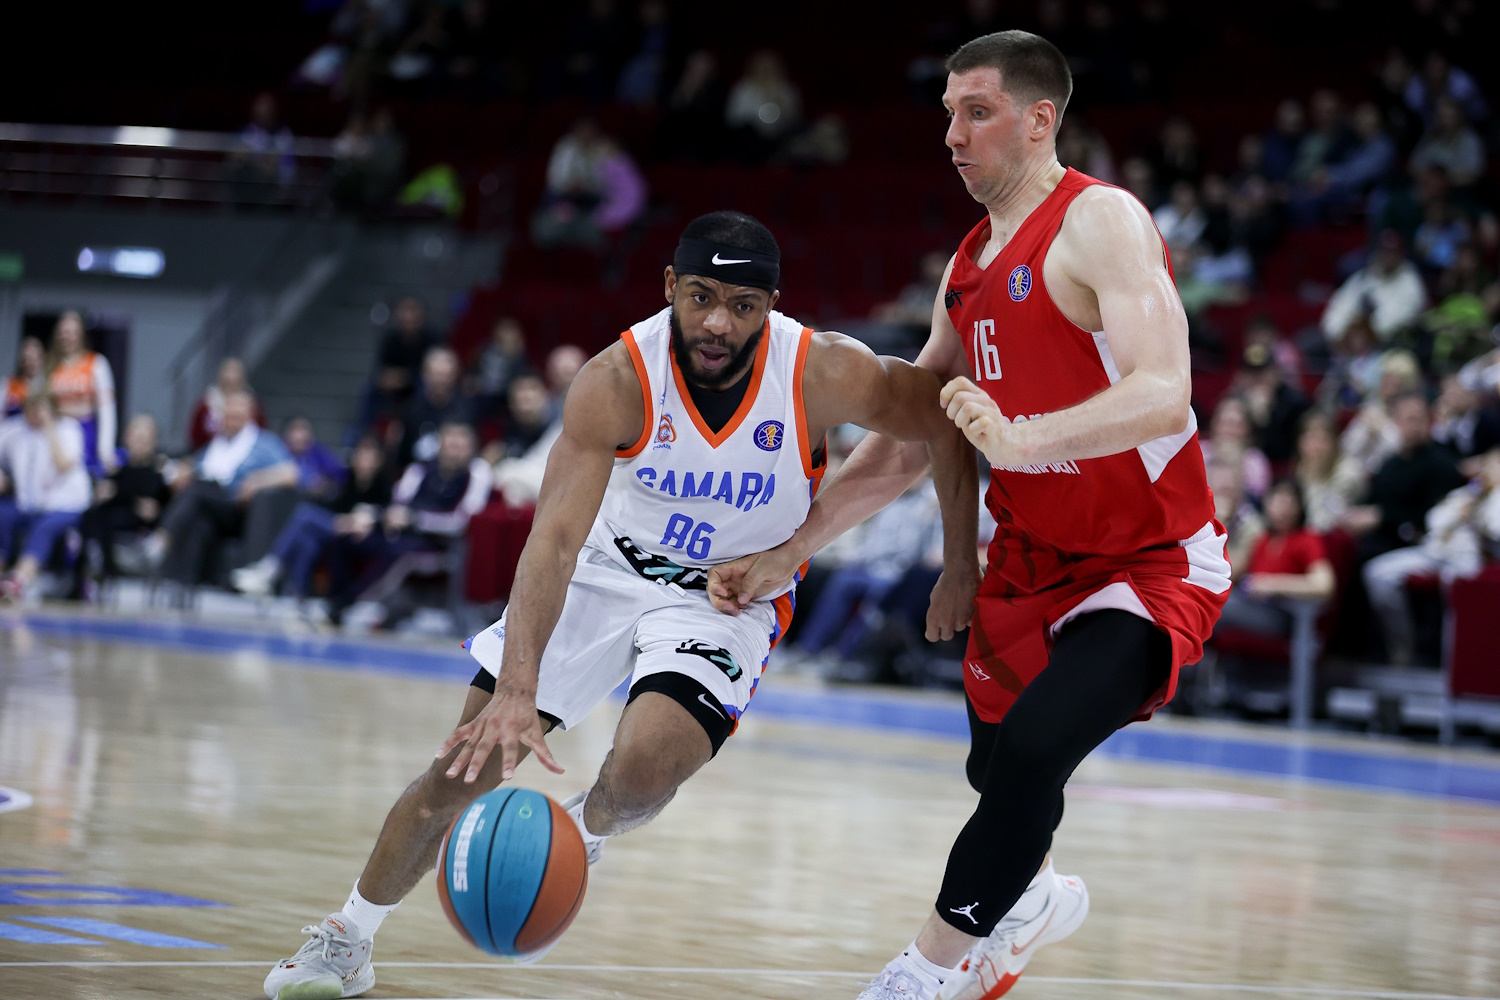 Game for the Playoffs: Samara versus MBA. Preview April 20